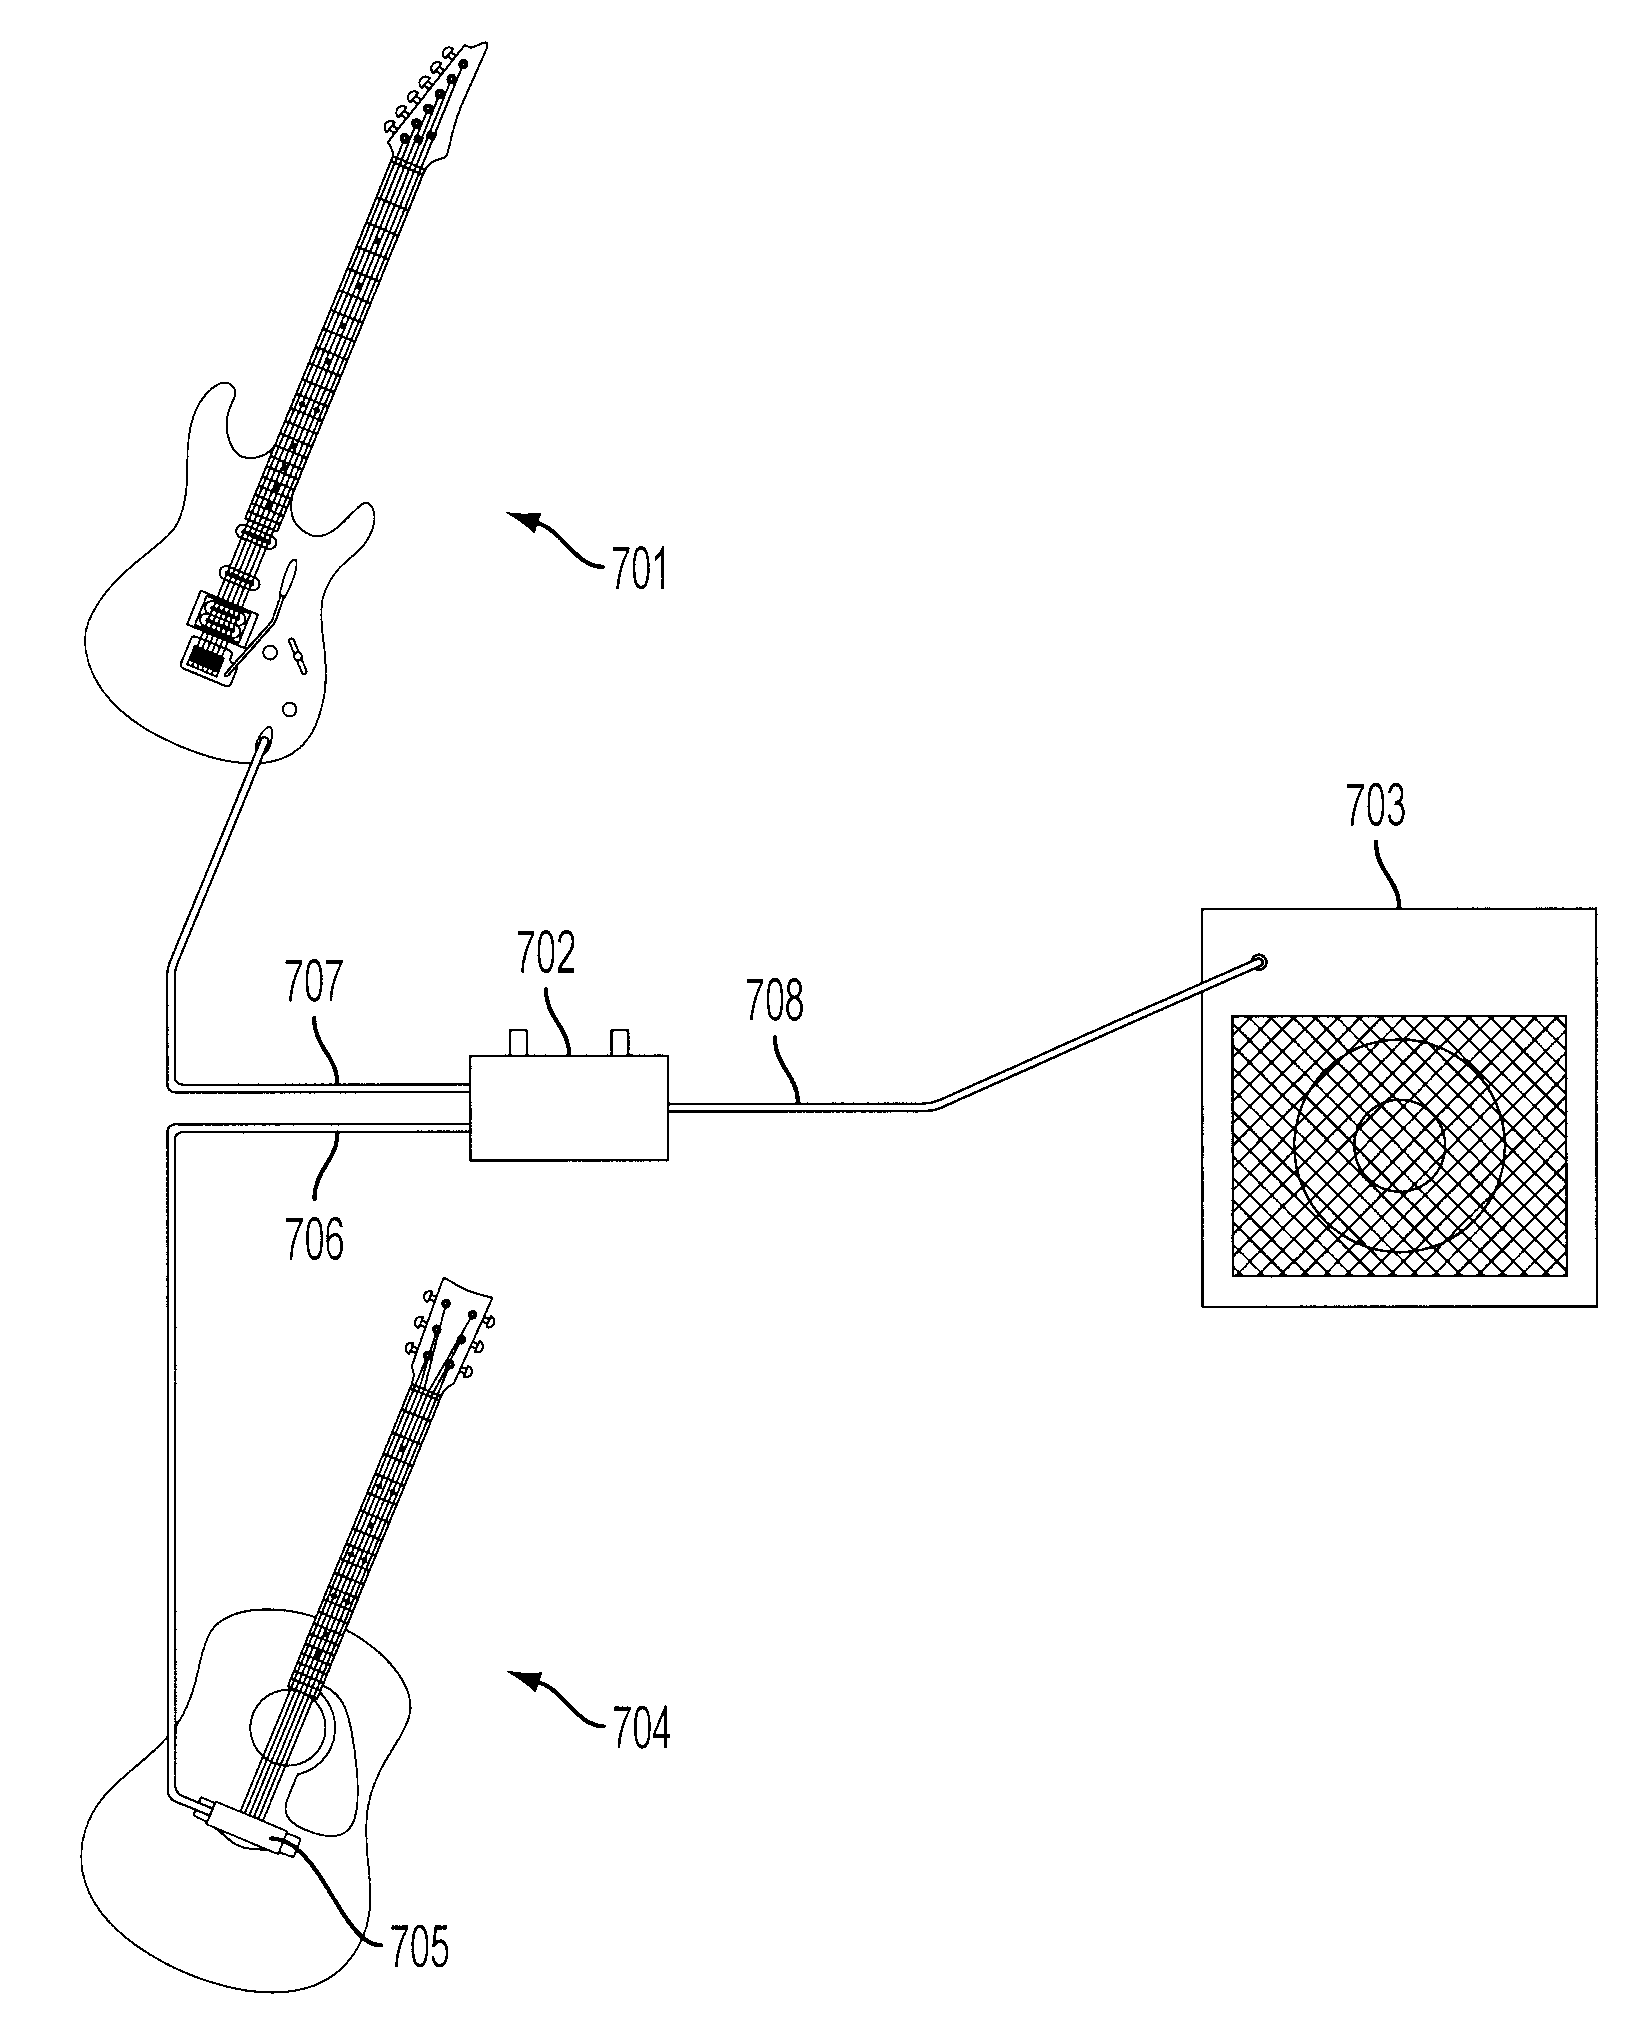 System and method for remotely generating sound from a musical instrument